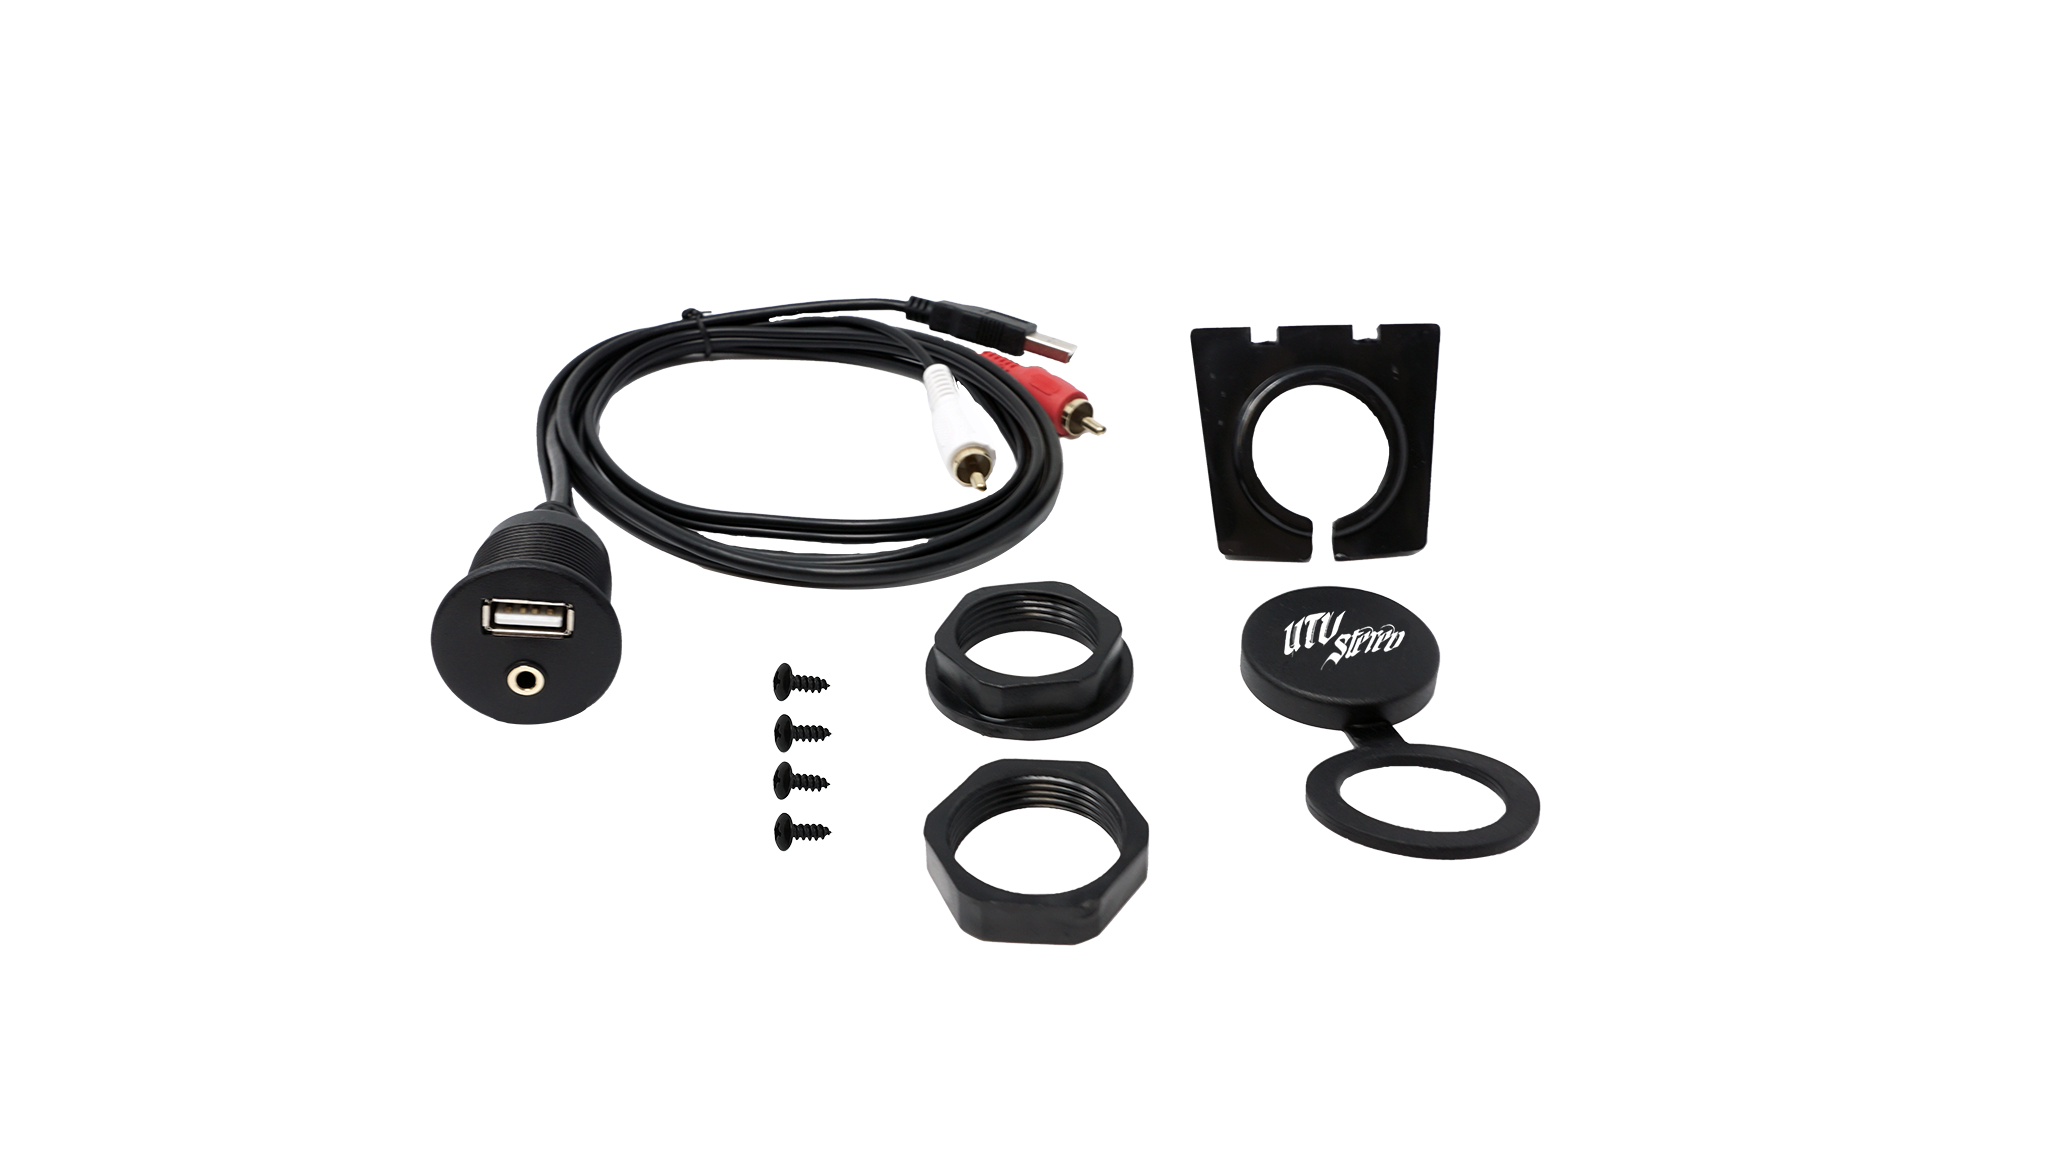 UtV Stereo USB & Auxiliary Flush Mount Adapter for Source Units